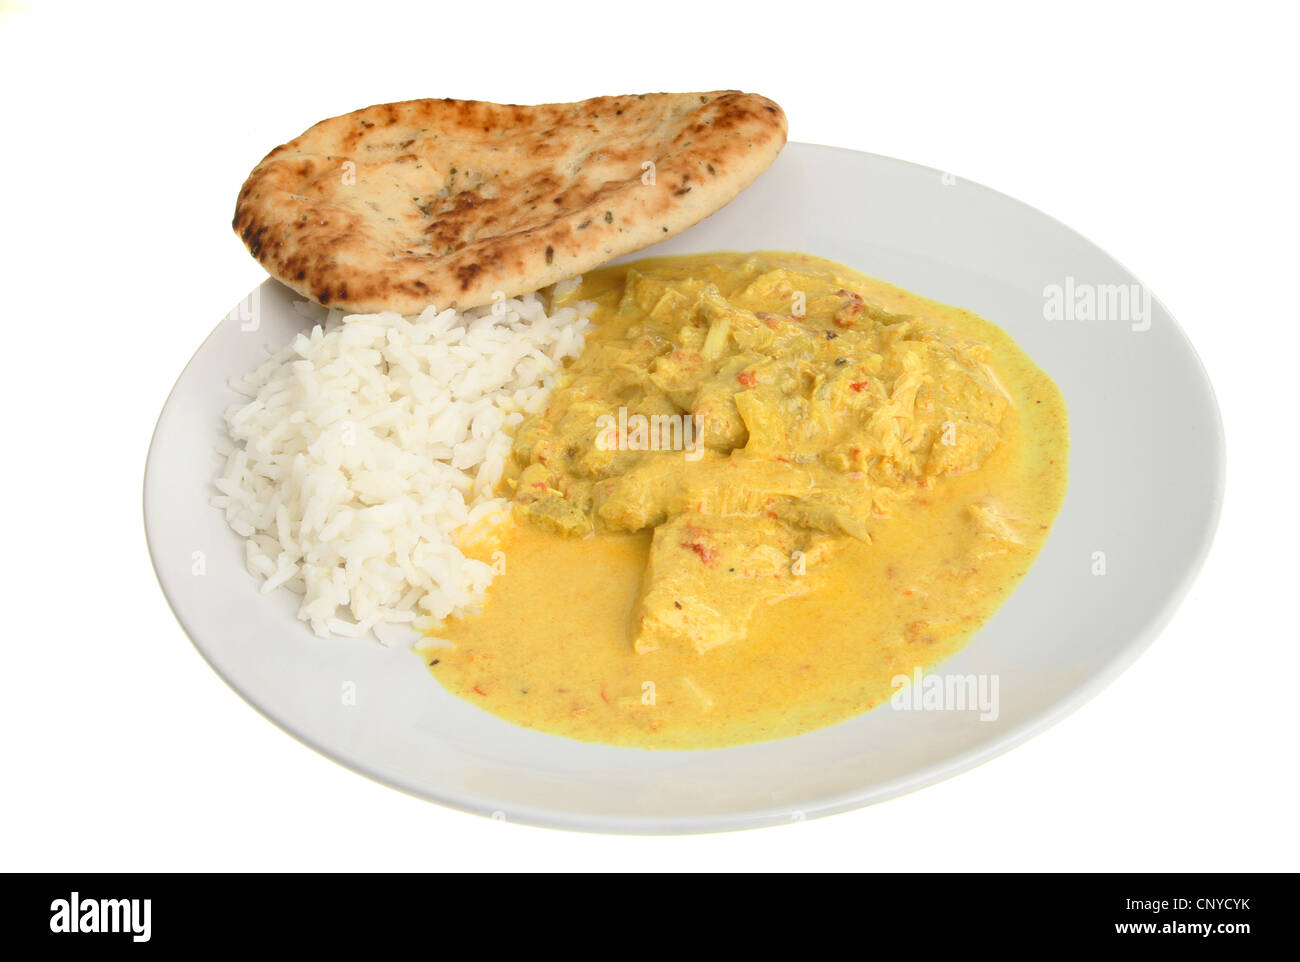 Chicken curry, rice and a naan bread on a plate isolated against white Stock Photo